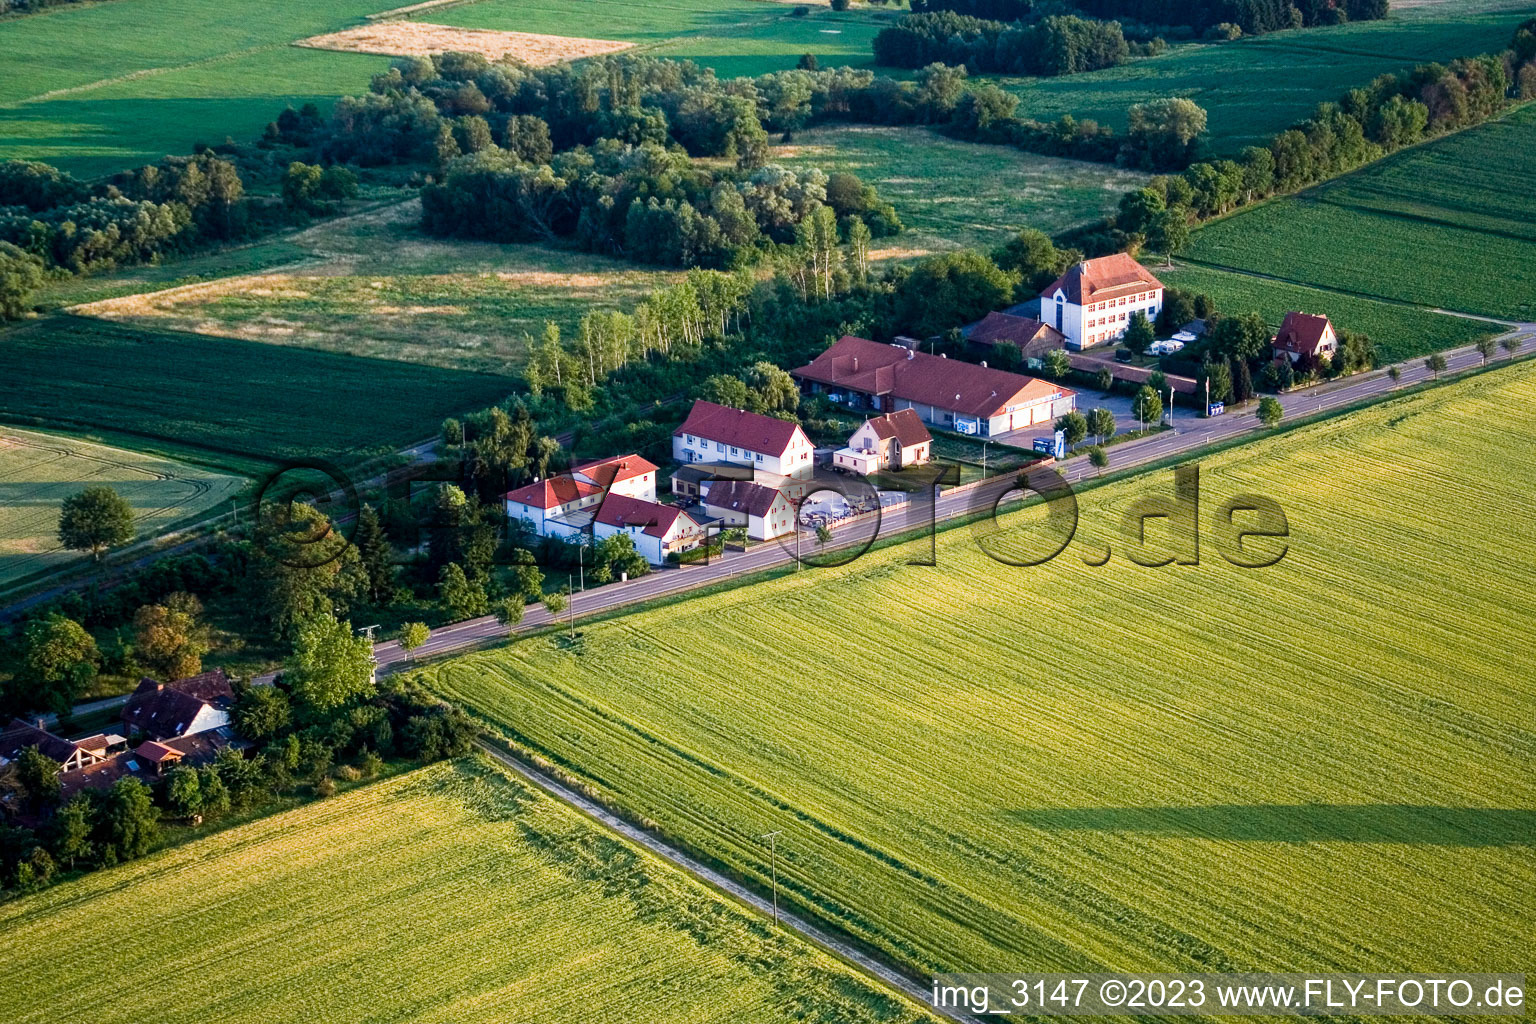 Drone image of Steinfeld in the state Rhineland-Palatinate, Germany